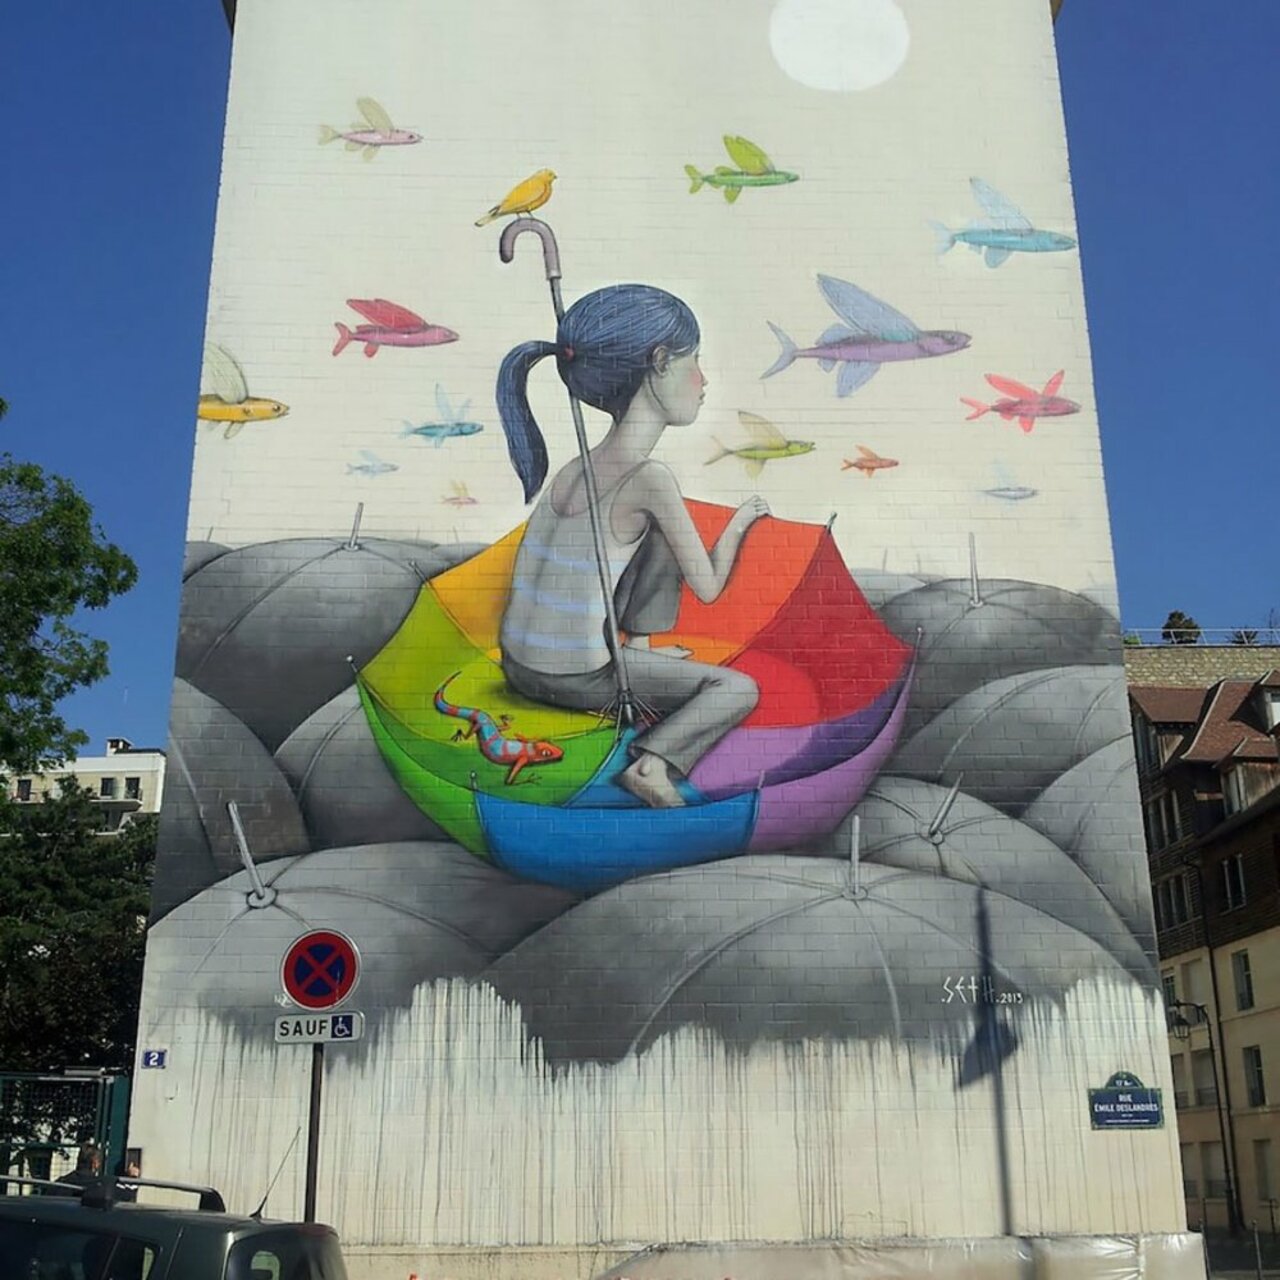 This French Street Artist Is Making Boring Buildings Beautiful http://buff.ly/1PjAxI0 #art https://t.co/oNxjo83n6k